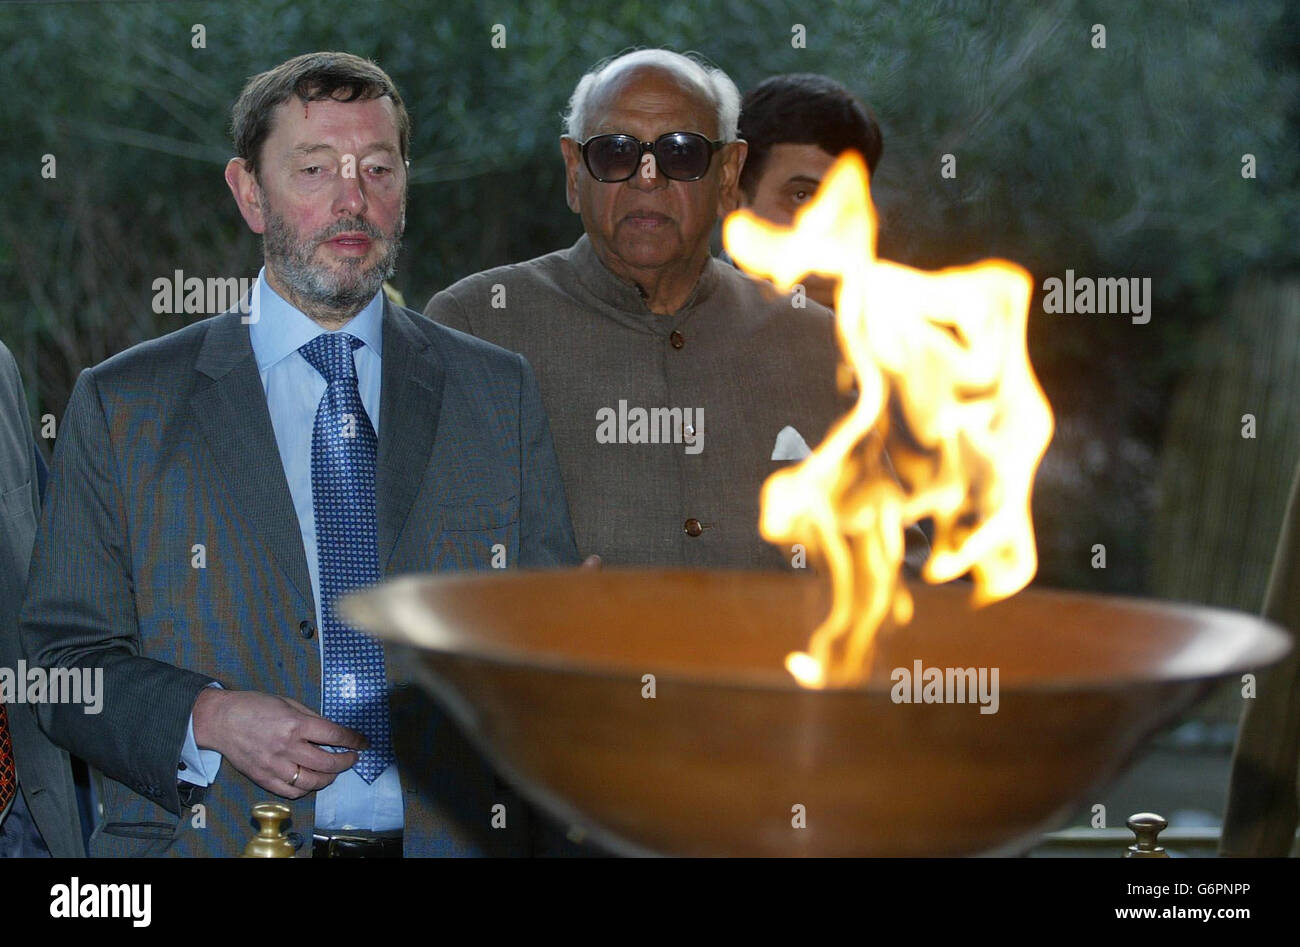 Home Secretary David Blunkett is shown the memorial at Jallianwala Bag in Amritsar. by local member of parliament RL Bhatia. He also visited the nearby Golden Temple in India's Punjab region. The temple is the main Sikh holy site but open to all religions and the scene of a bloody battle in 1984 in which hundreds of Sikhs died. Stock Photo